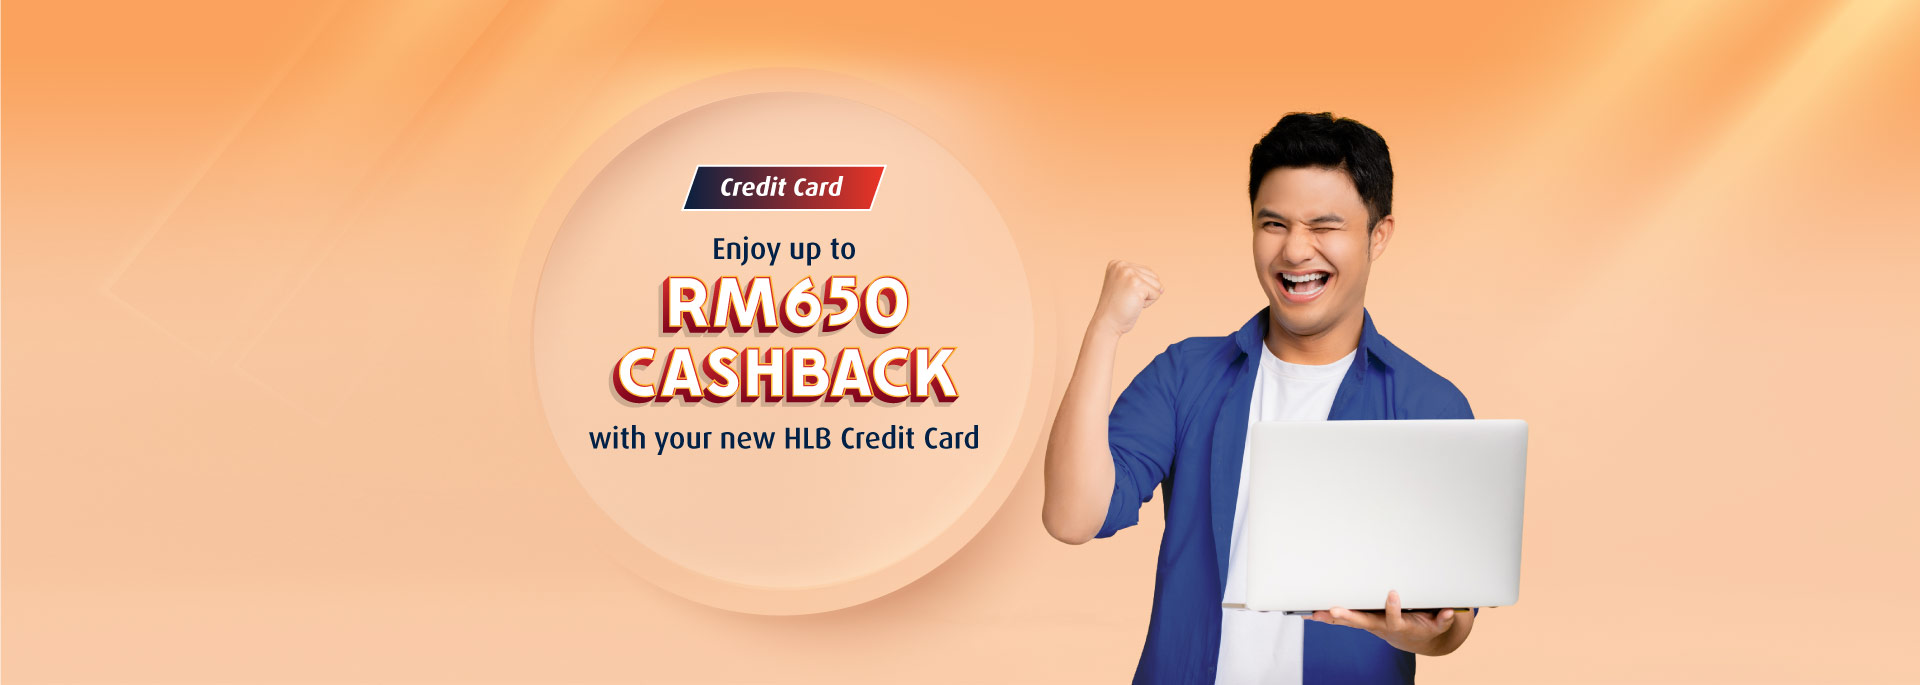 Check out your Shopee cart with your new HLB Credit Card to enjoy more cashback!